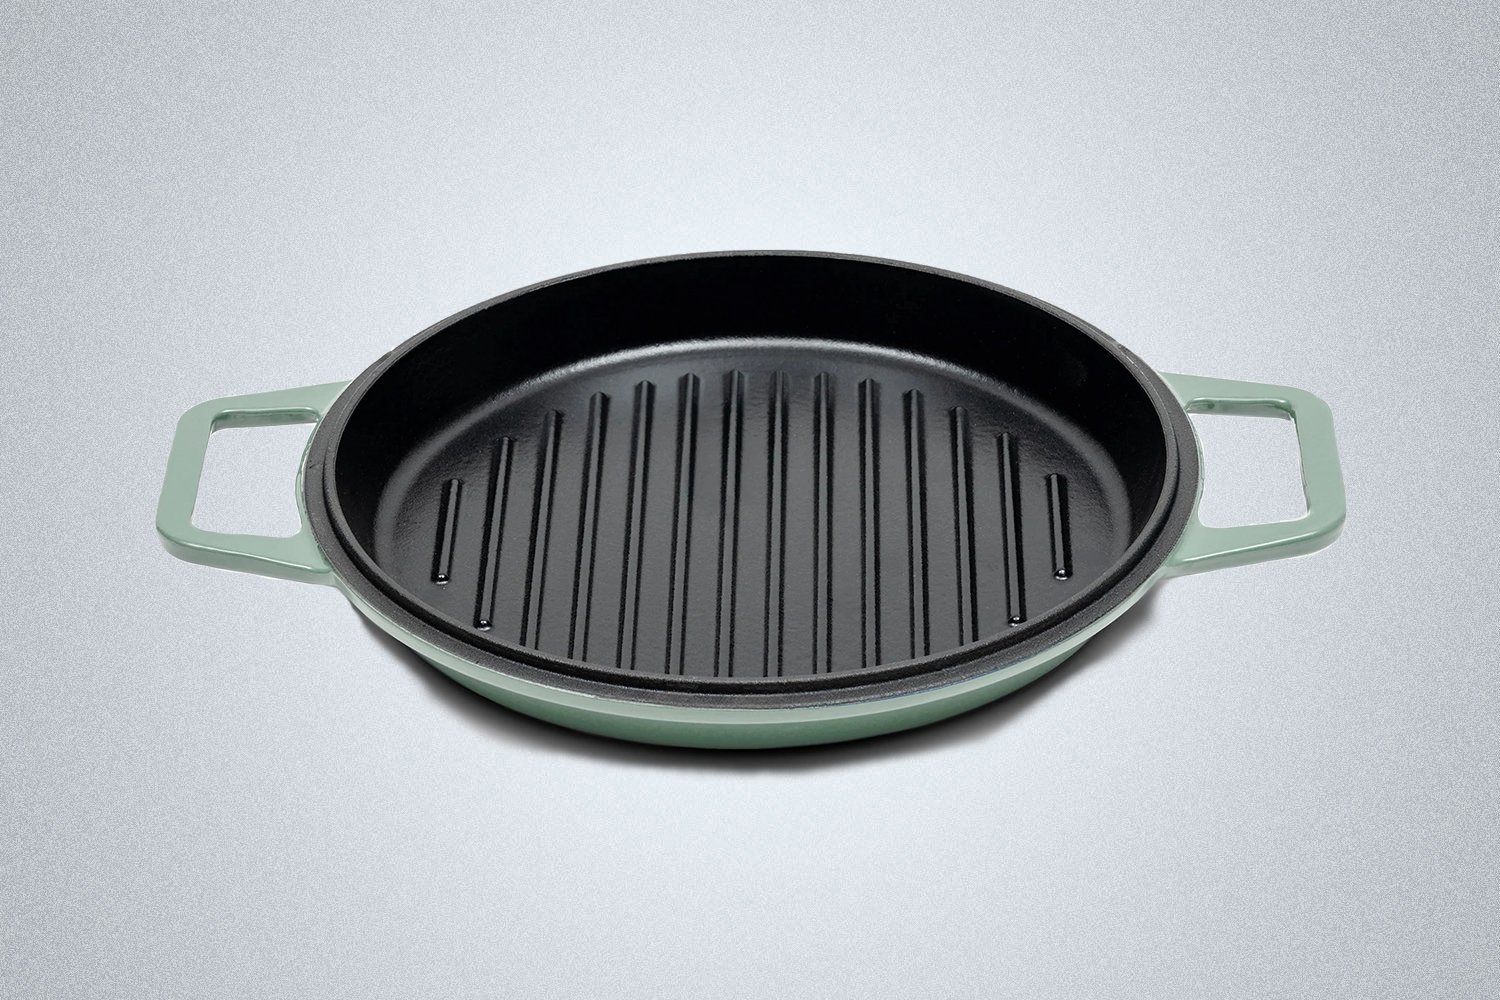 The Misen Grill Pan